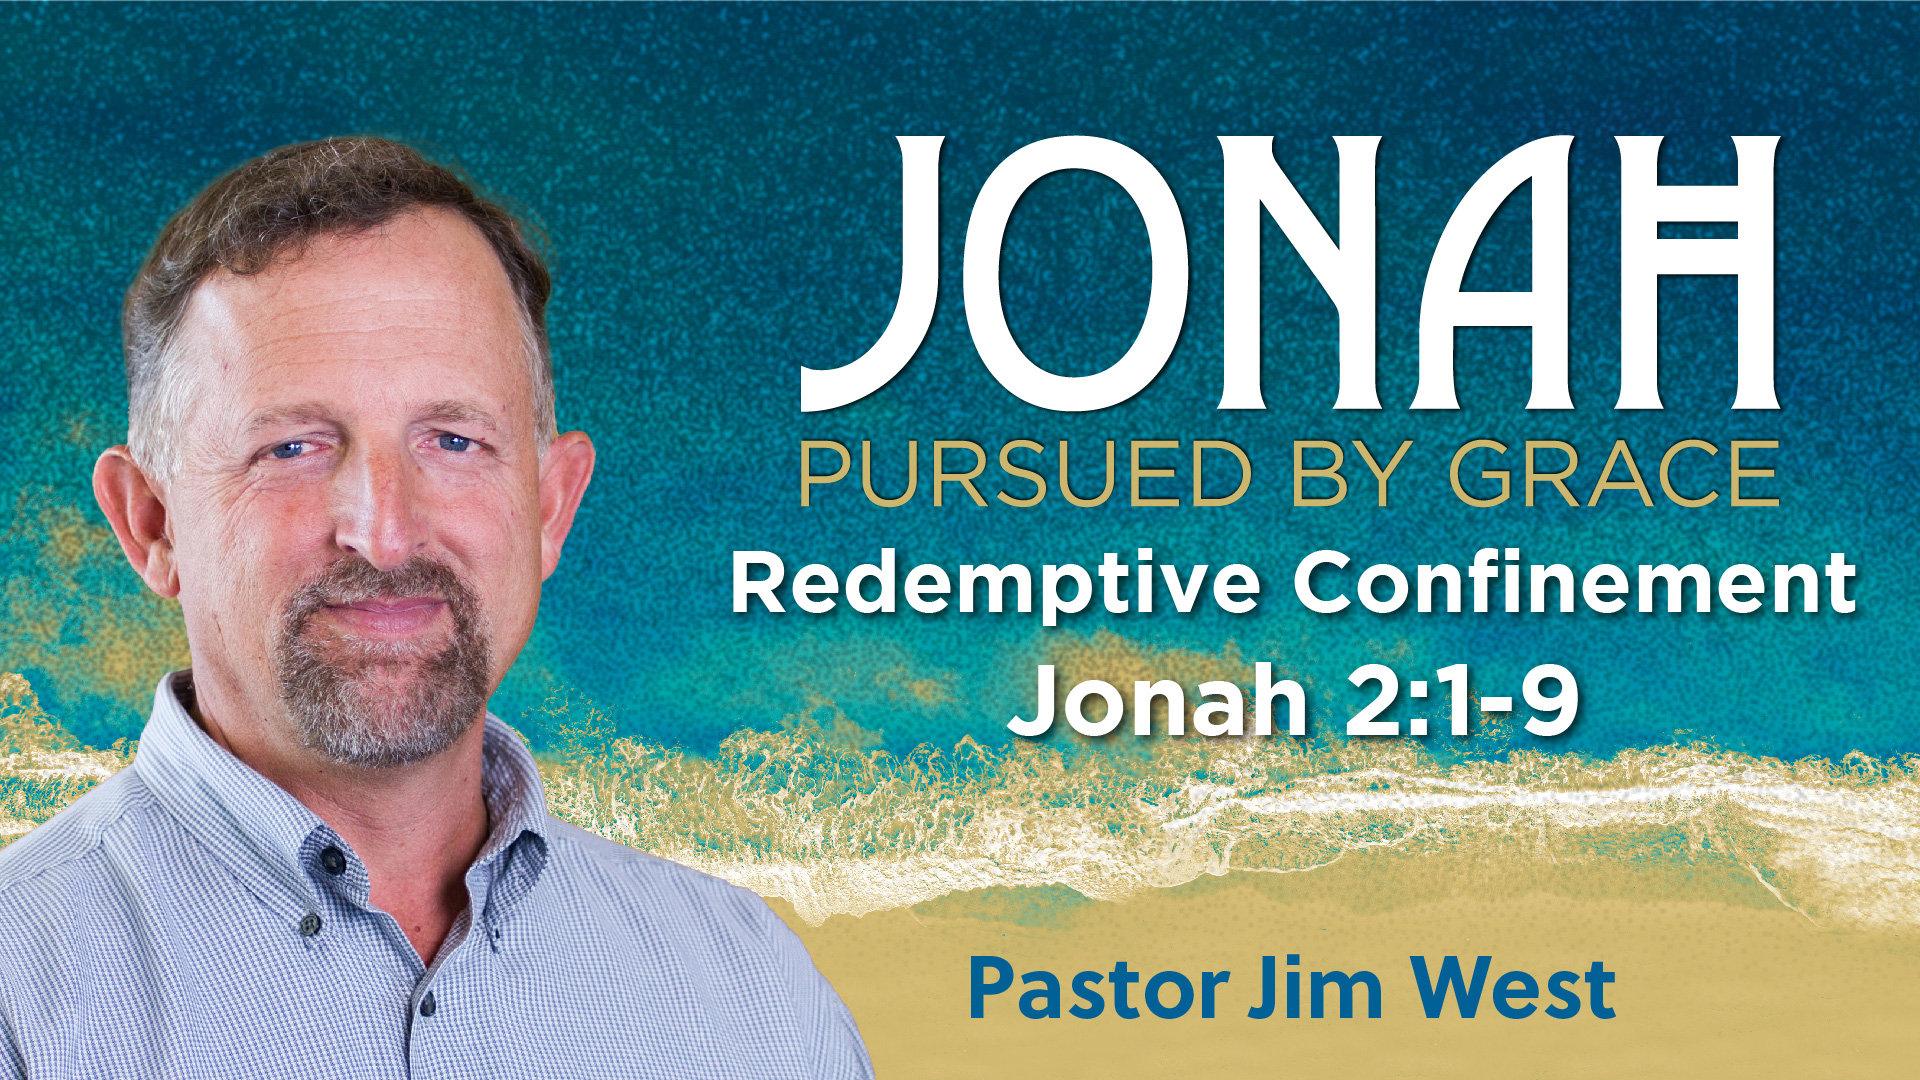 Featured image for “Jonah: Redemptive Confinement”